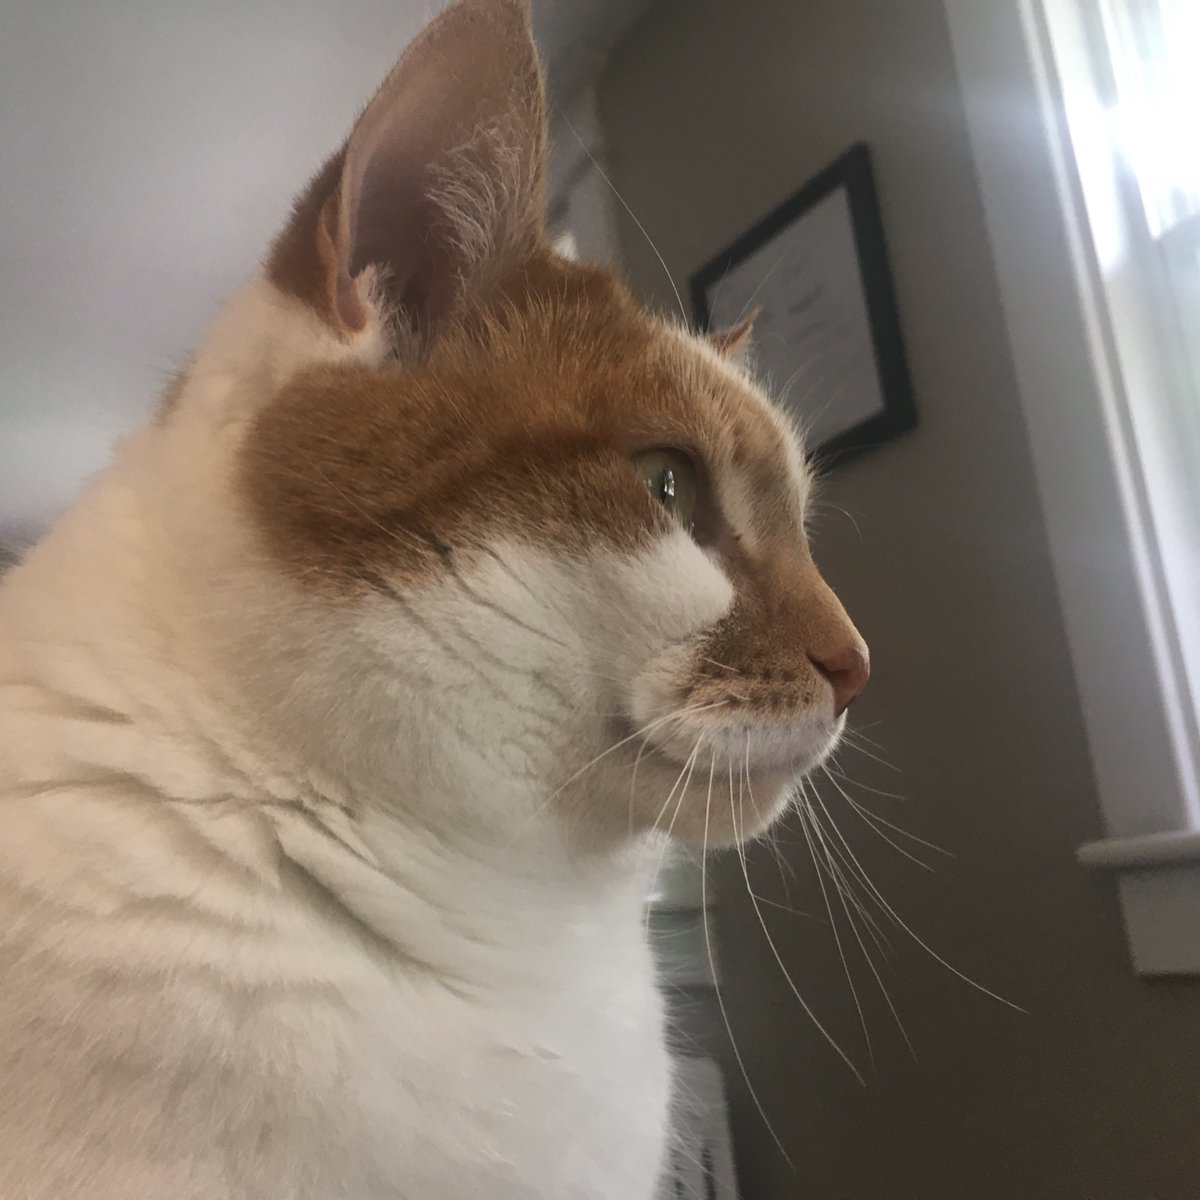 Charlie the cat, handsome in his white and orange, gazes covetously outside.